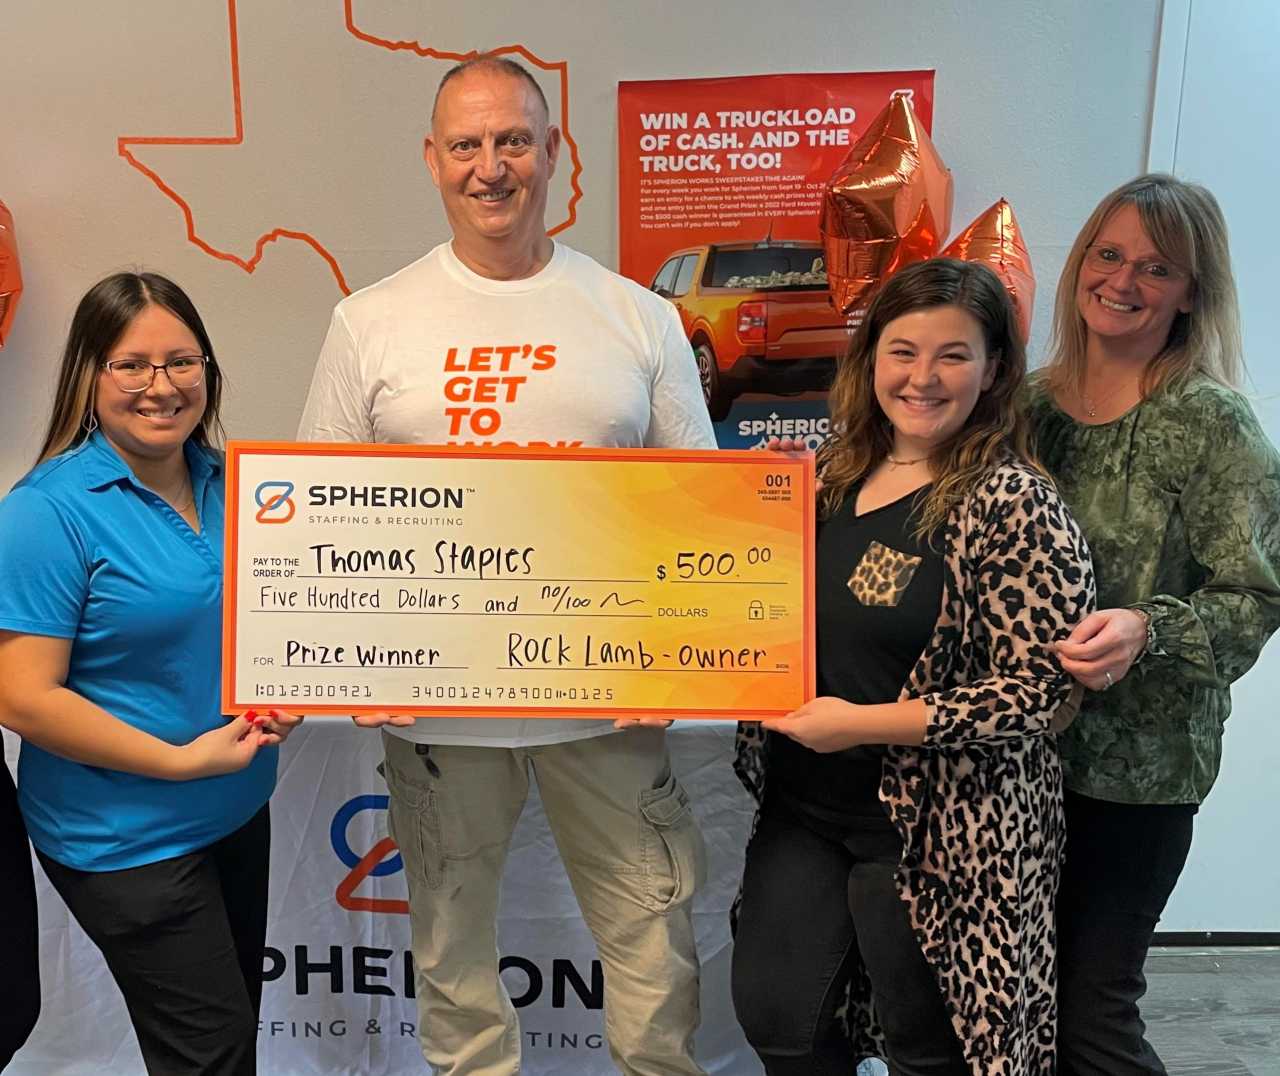 Employees from the Spherion Jacksonville, Texas office helping a $500 prize winner hold up a giant Spherion check